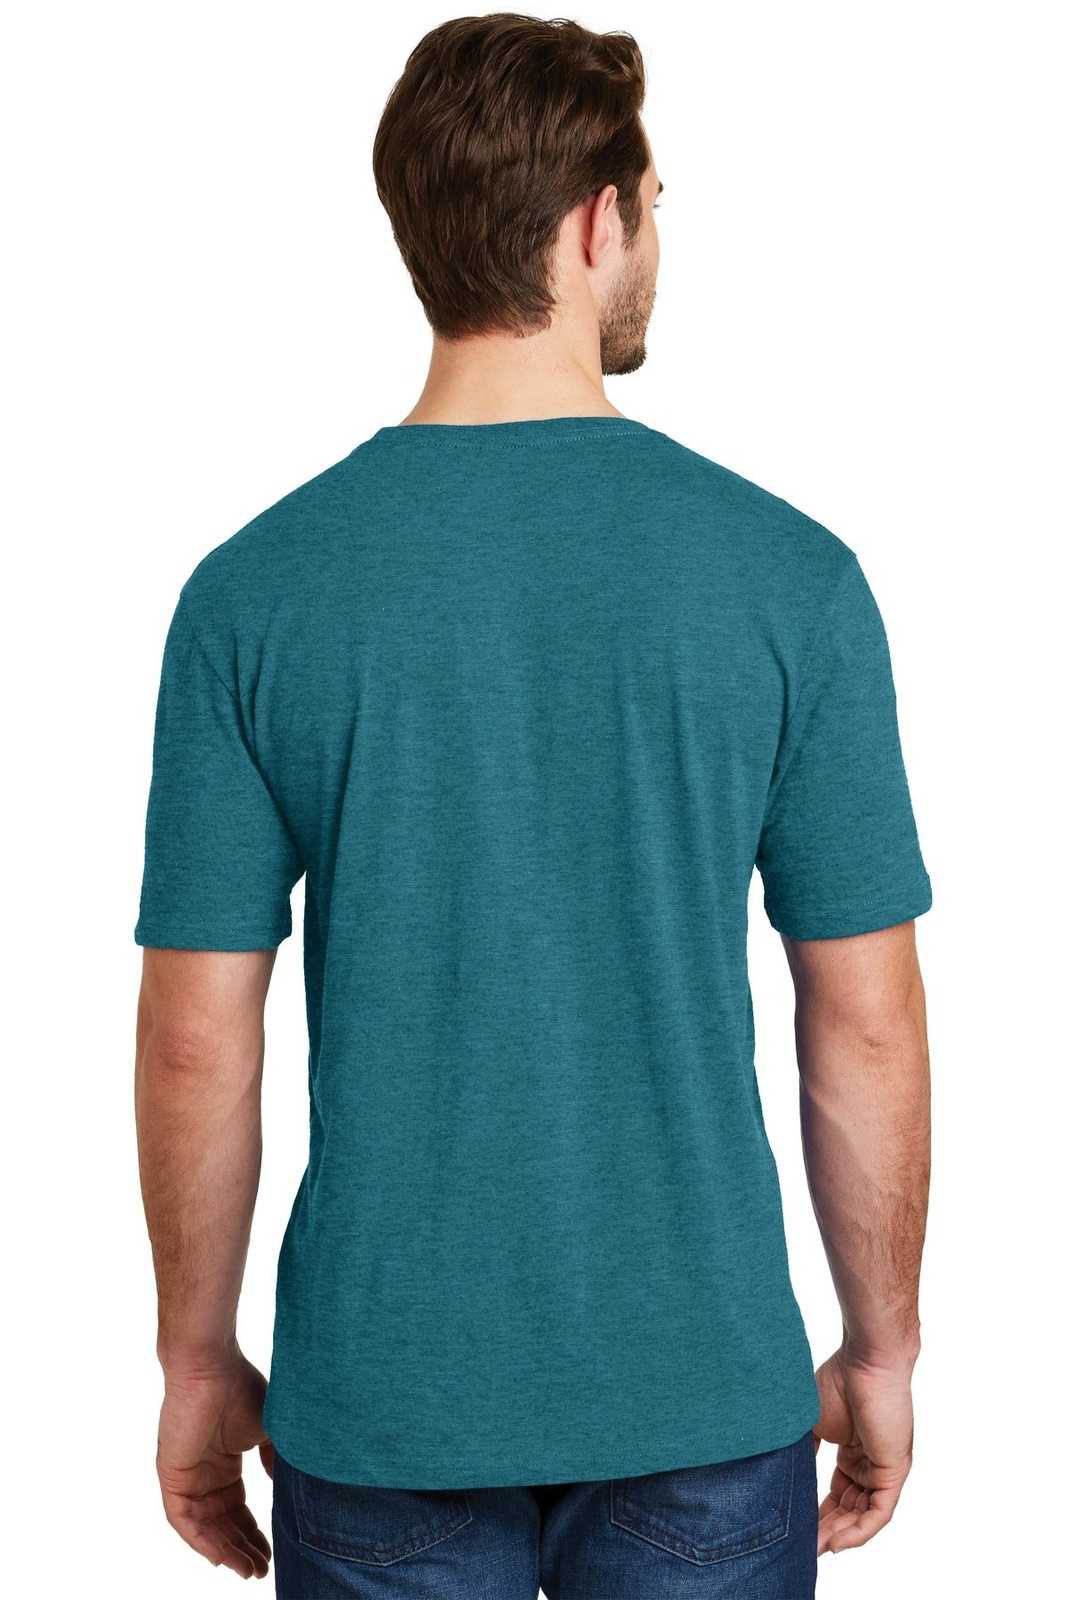 District DM108 Perfect Blend Tee - Heathered Teal - HIT a Double - 2